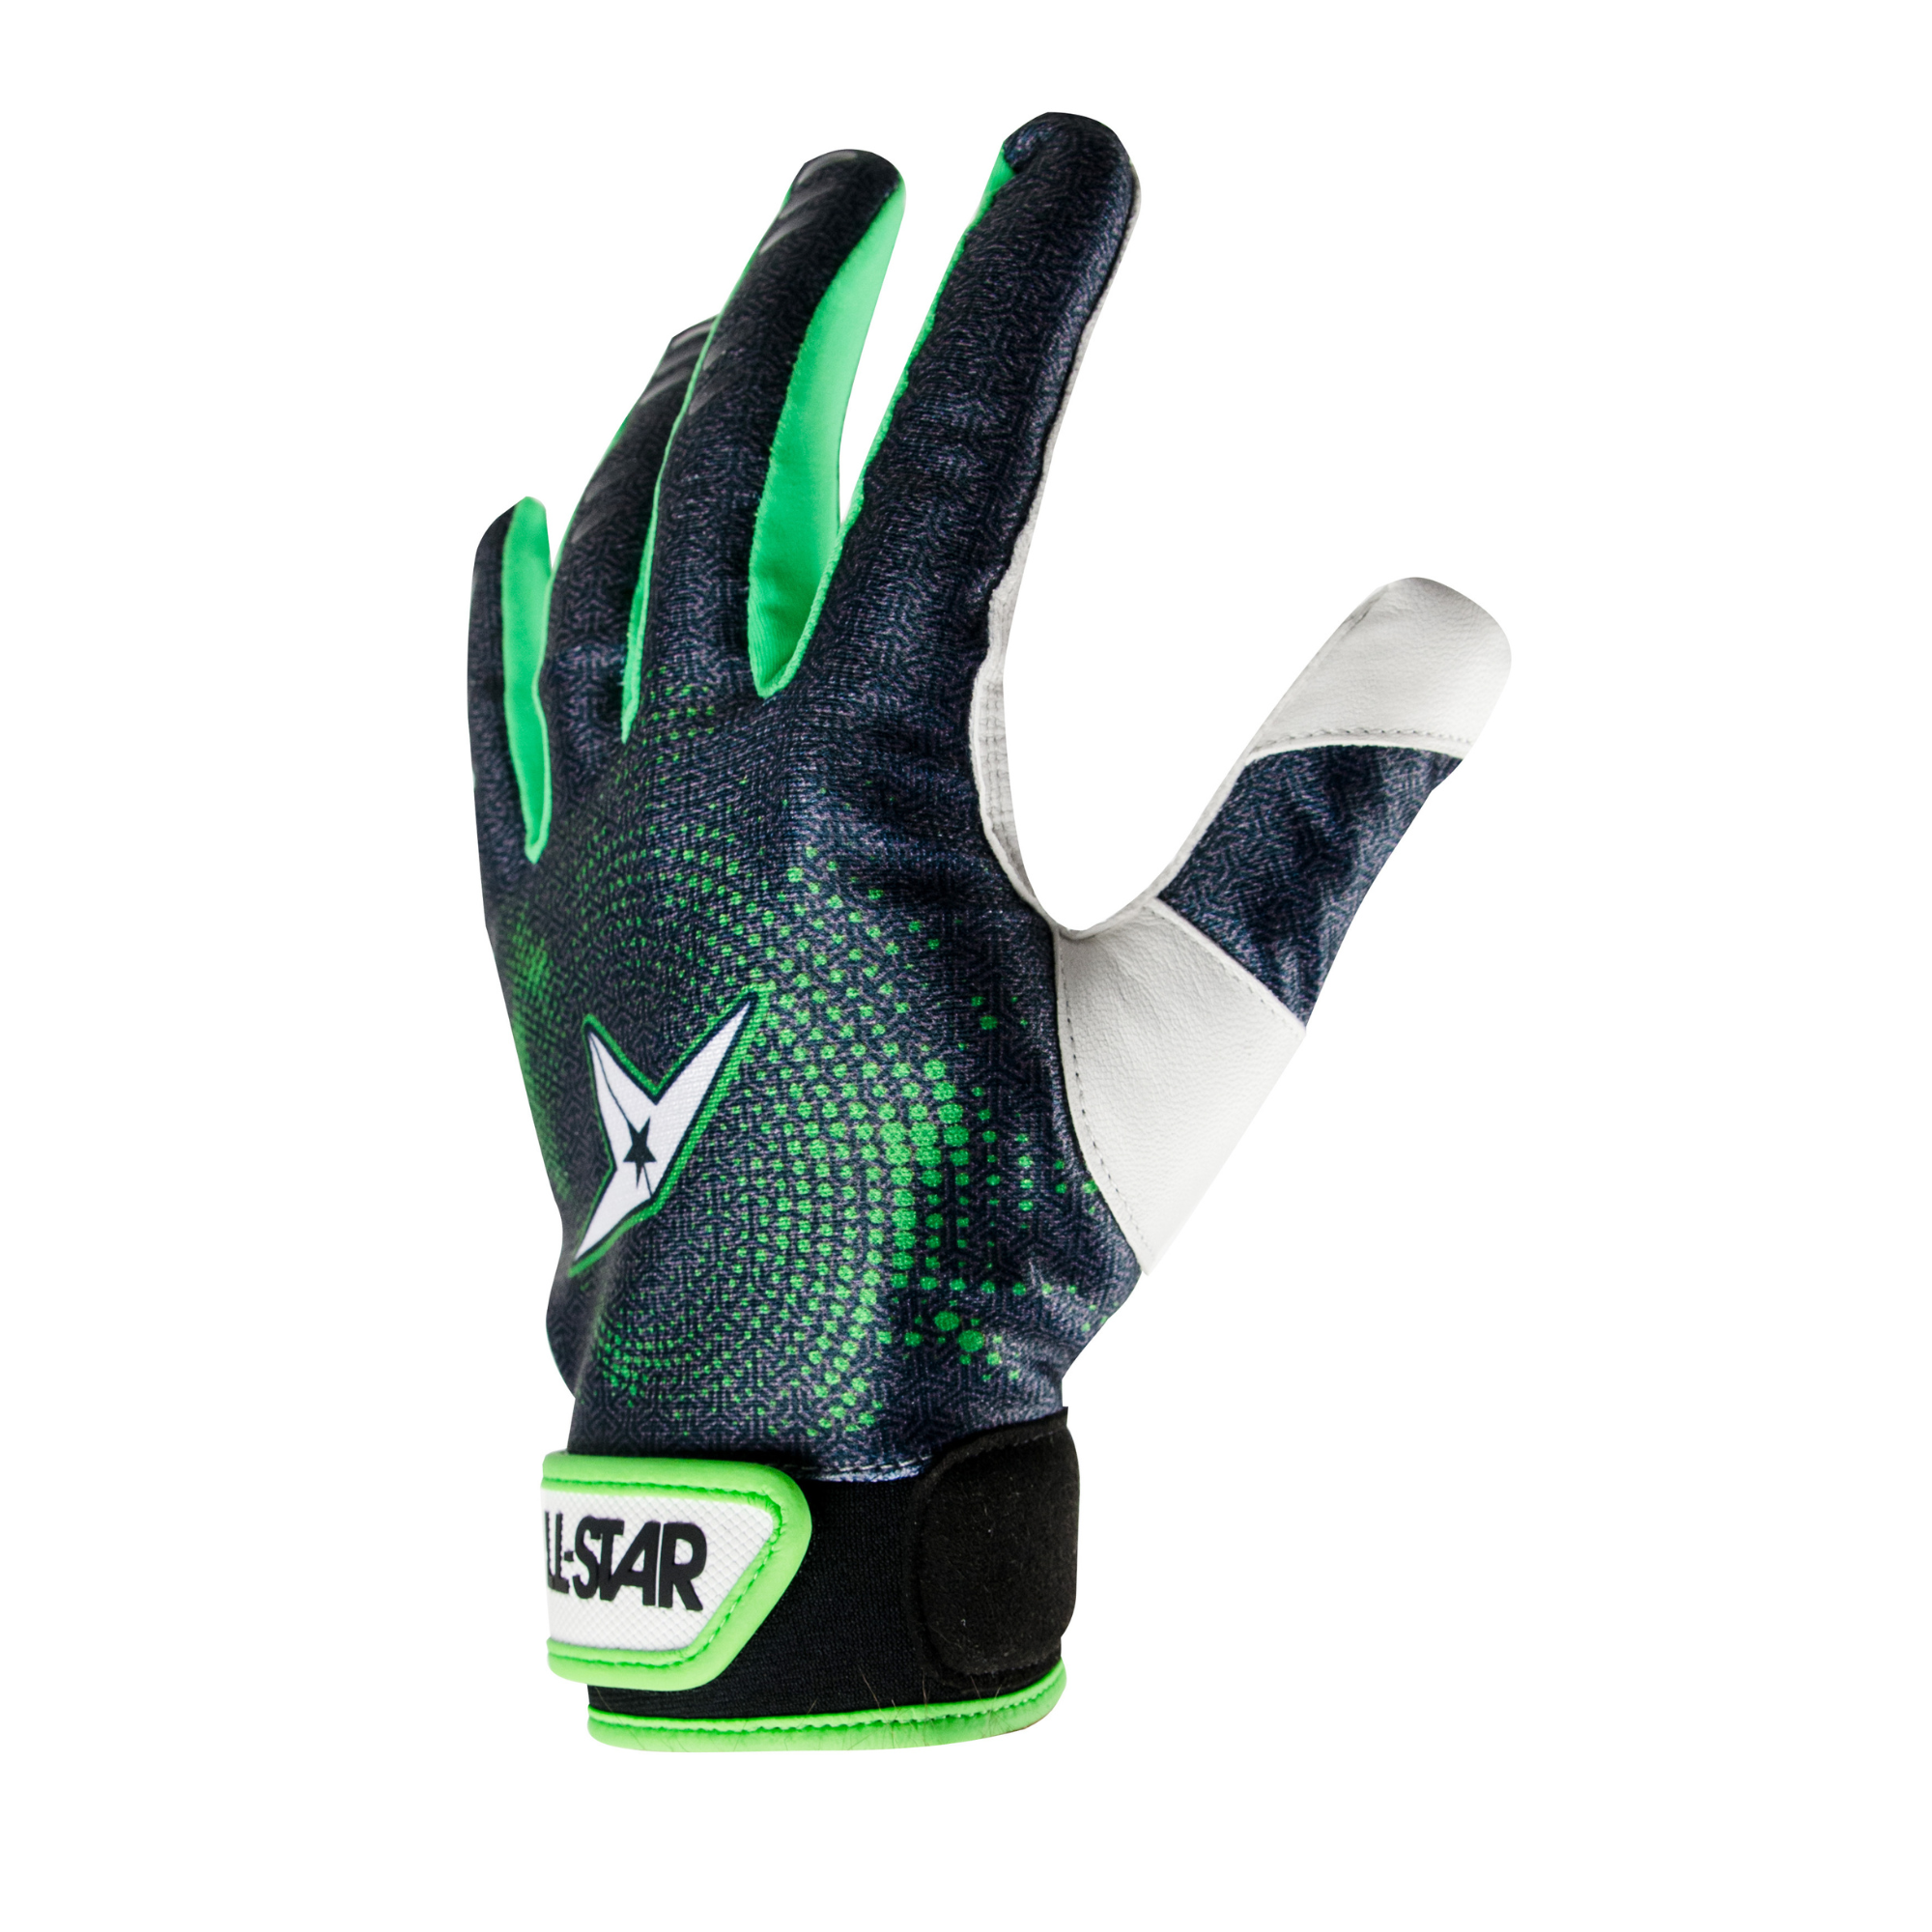 All-Star  Adult Protective Catcher's Inner Glove - Fingers Only